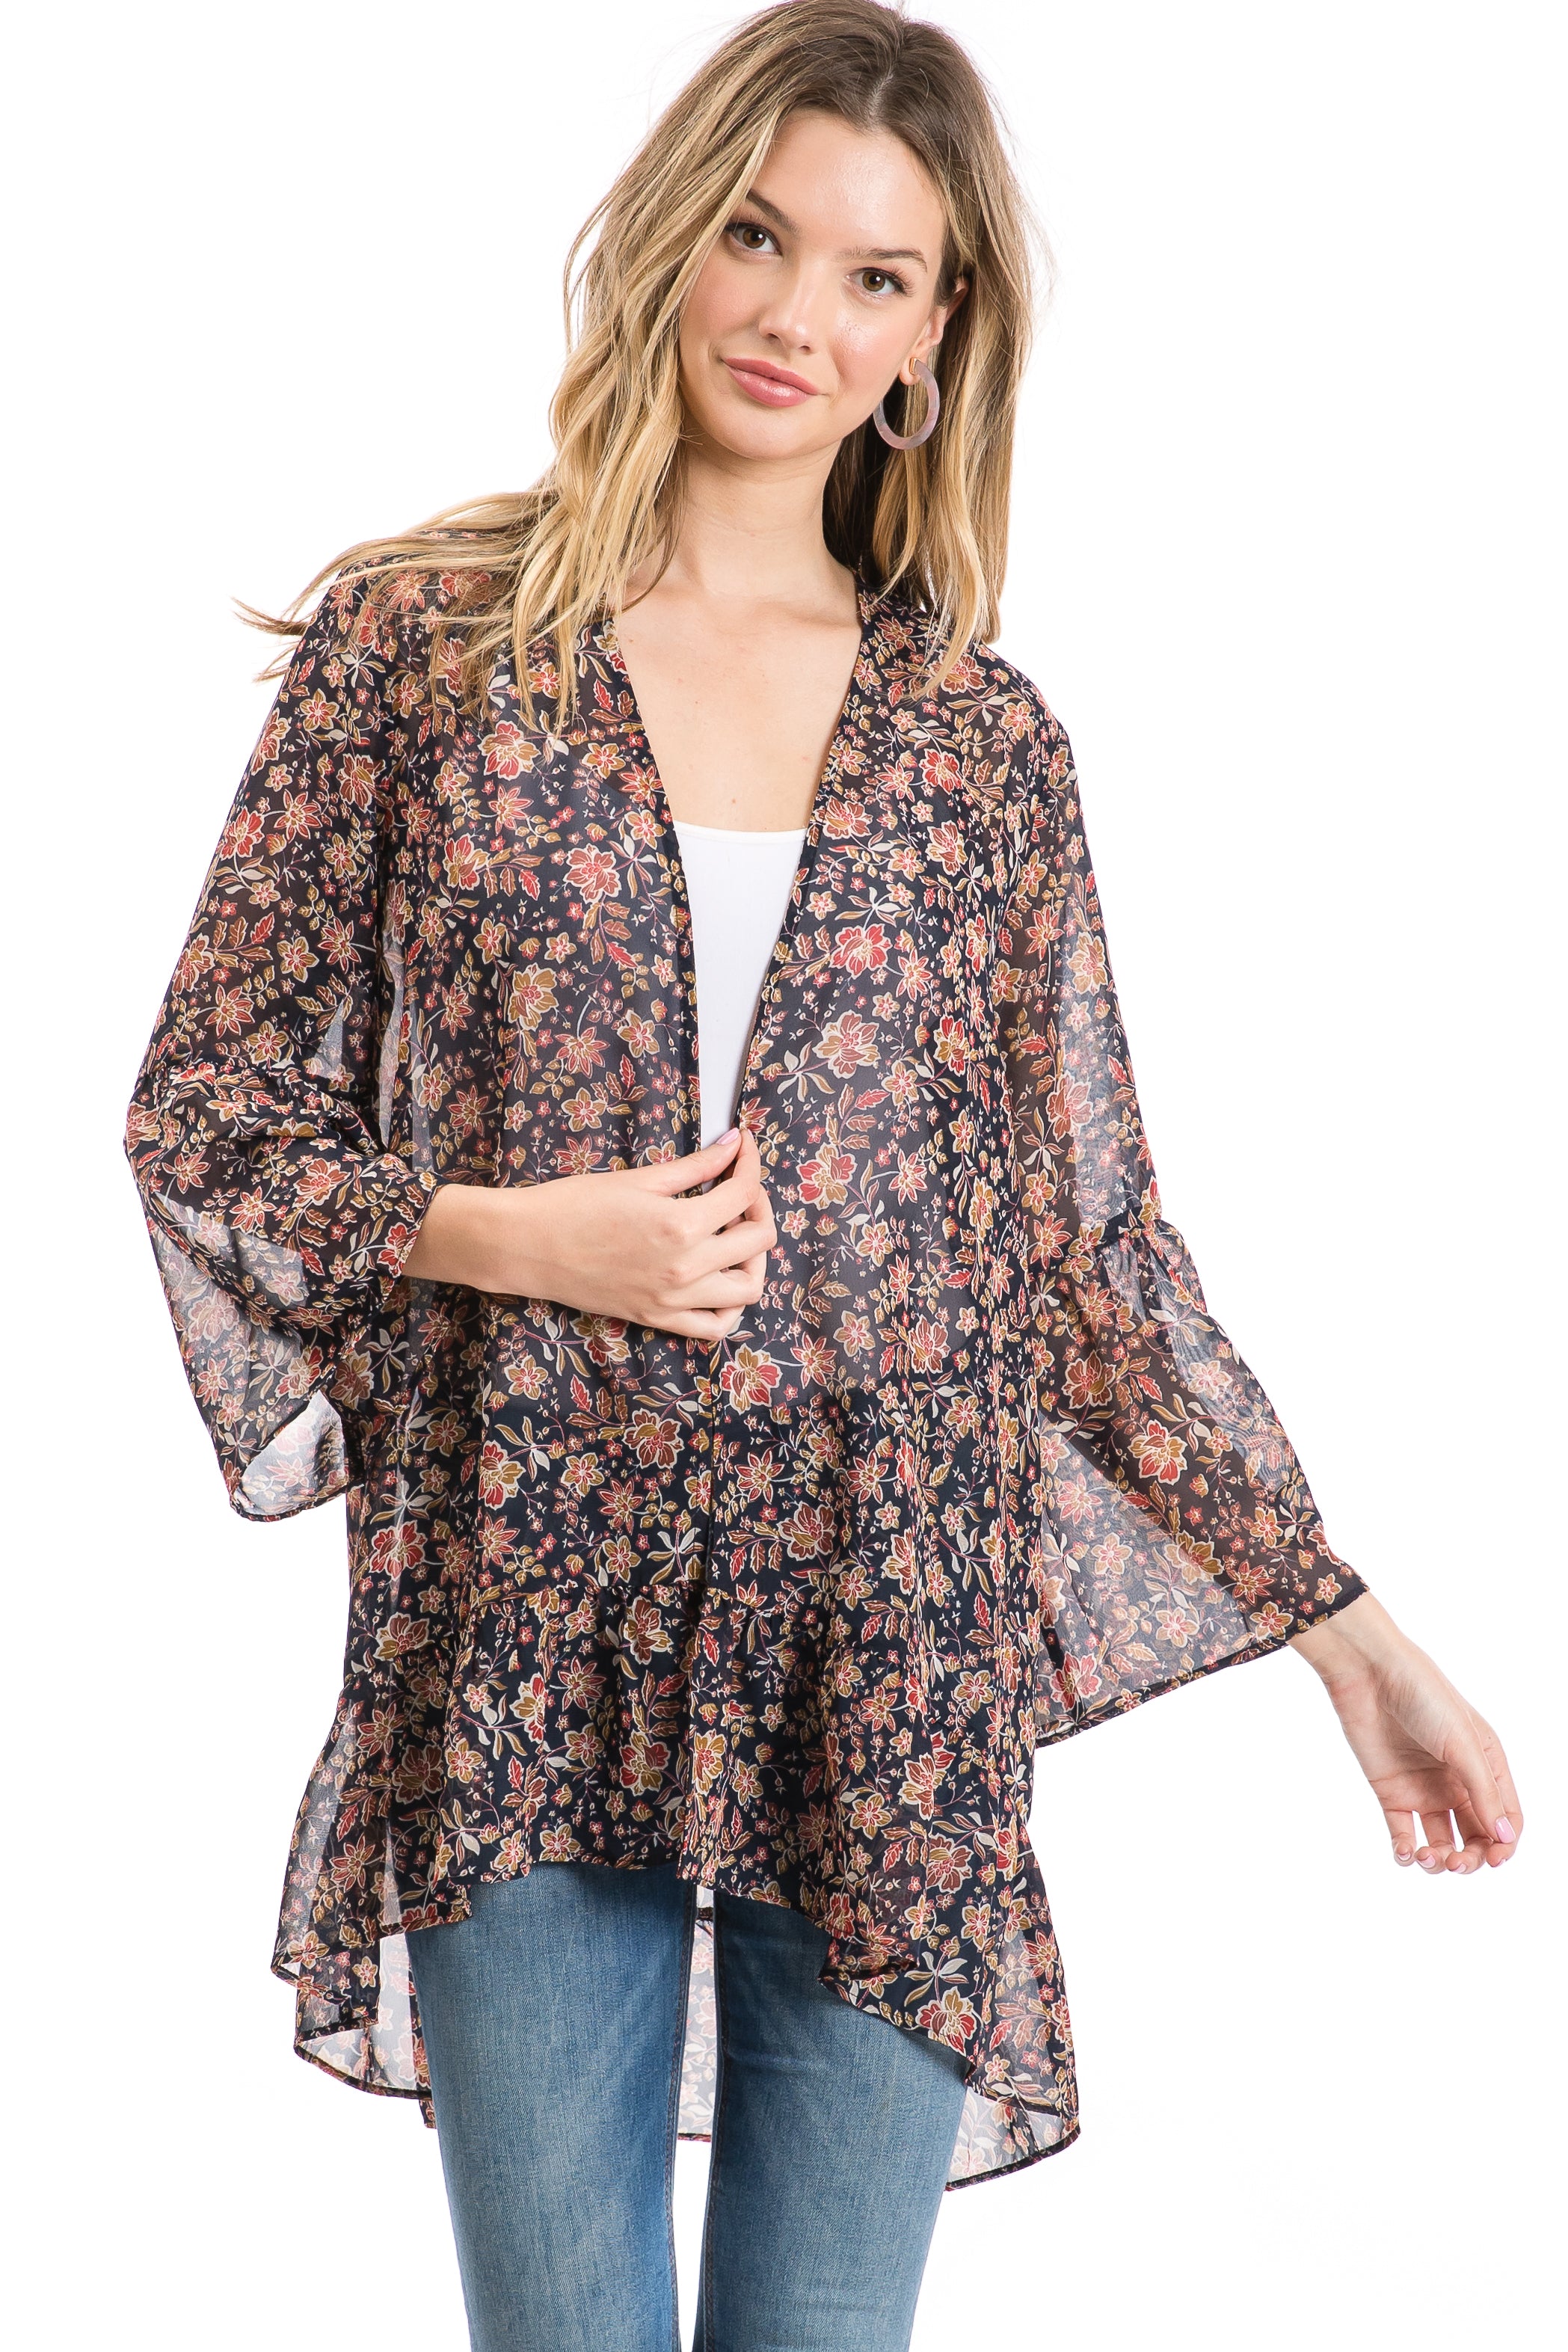 Floral Tiered Kimono Topper | Charming Charlie